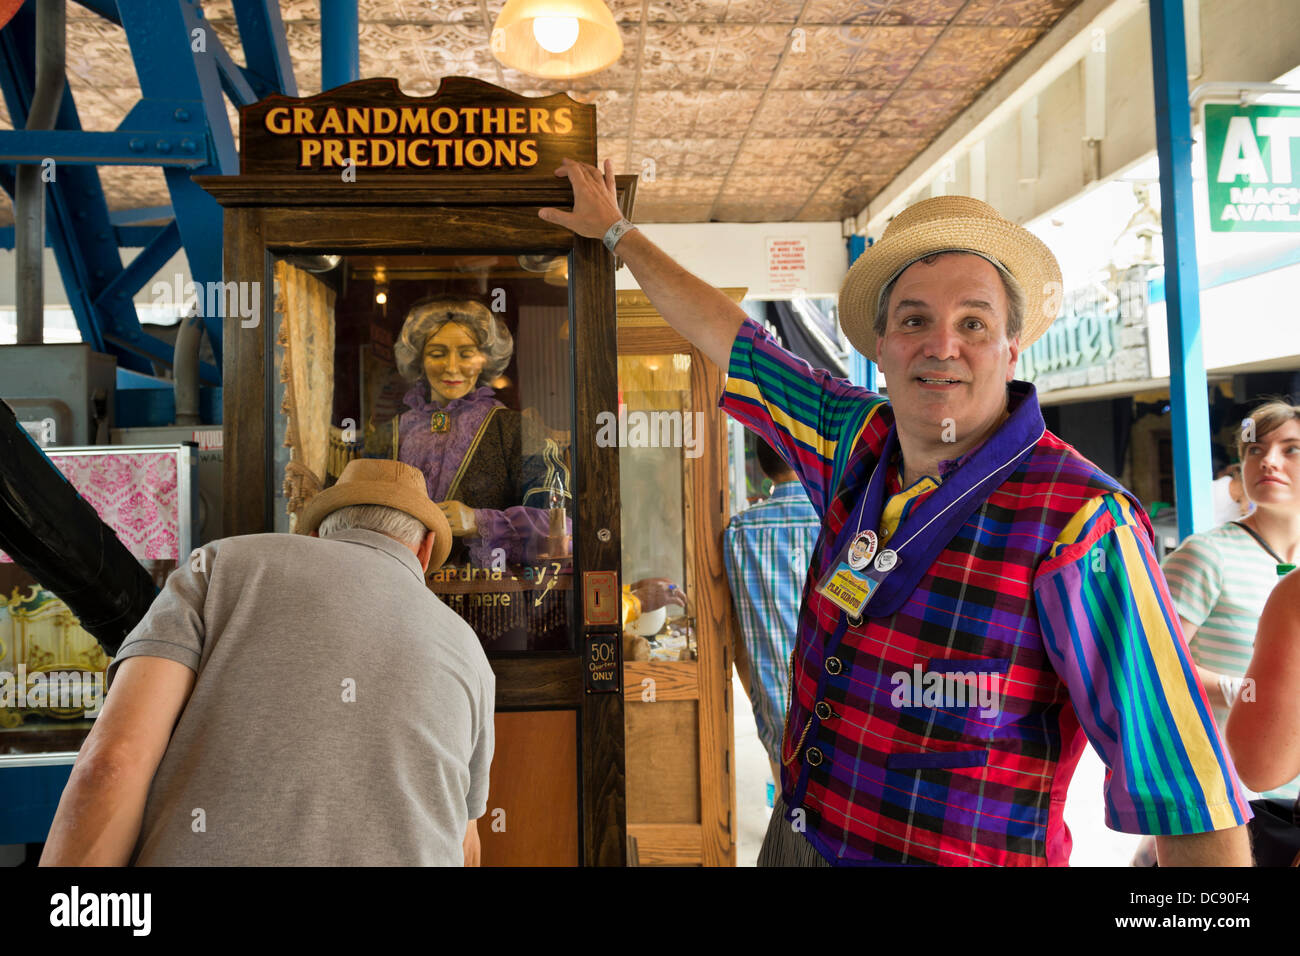 Brooklyn, New York, USA. 10th August 2013. At Coney Island, BOB YORBURG, AKA Professor Phineas FeelGood, of Yorktown Heights, points to Grandmothers Predictions, the world famous fortune telling game he restored after it was damaged during Hurricane Sandy, in October 2012. At 3rd Annual Coney Island History Day celebration. Stock Photo